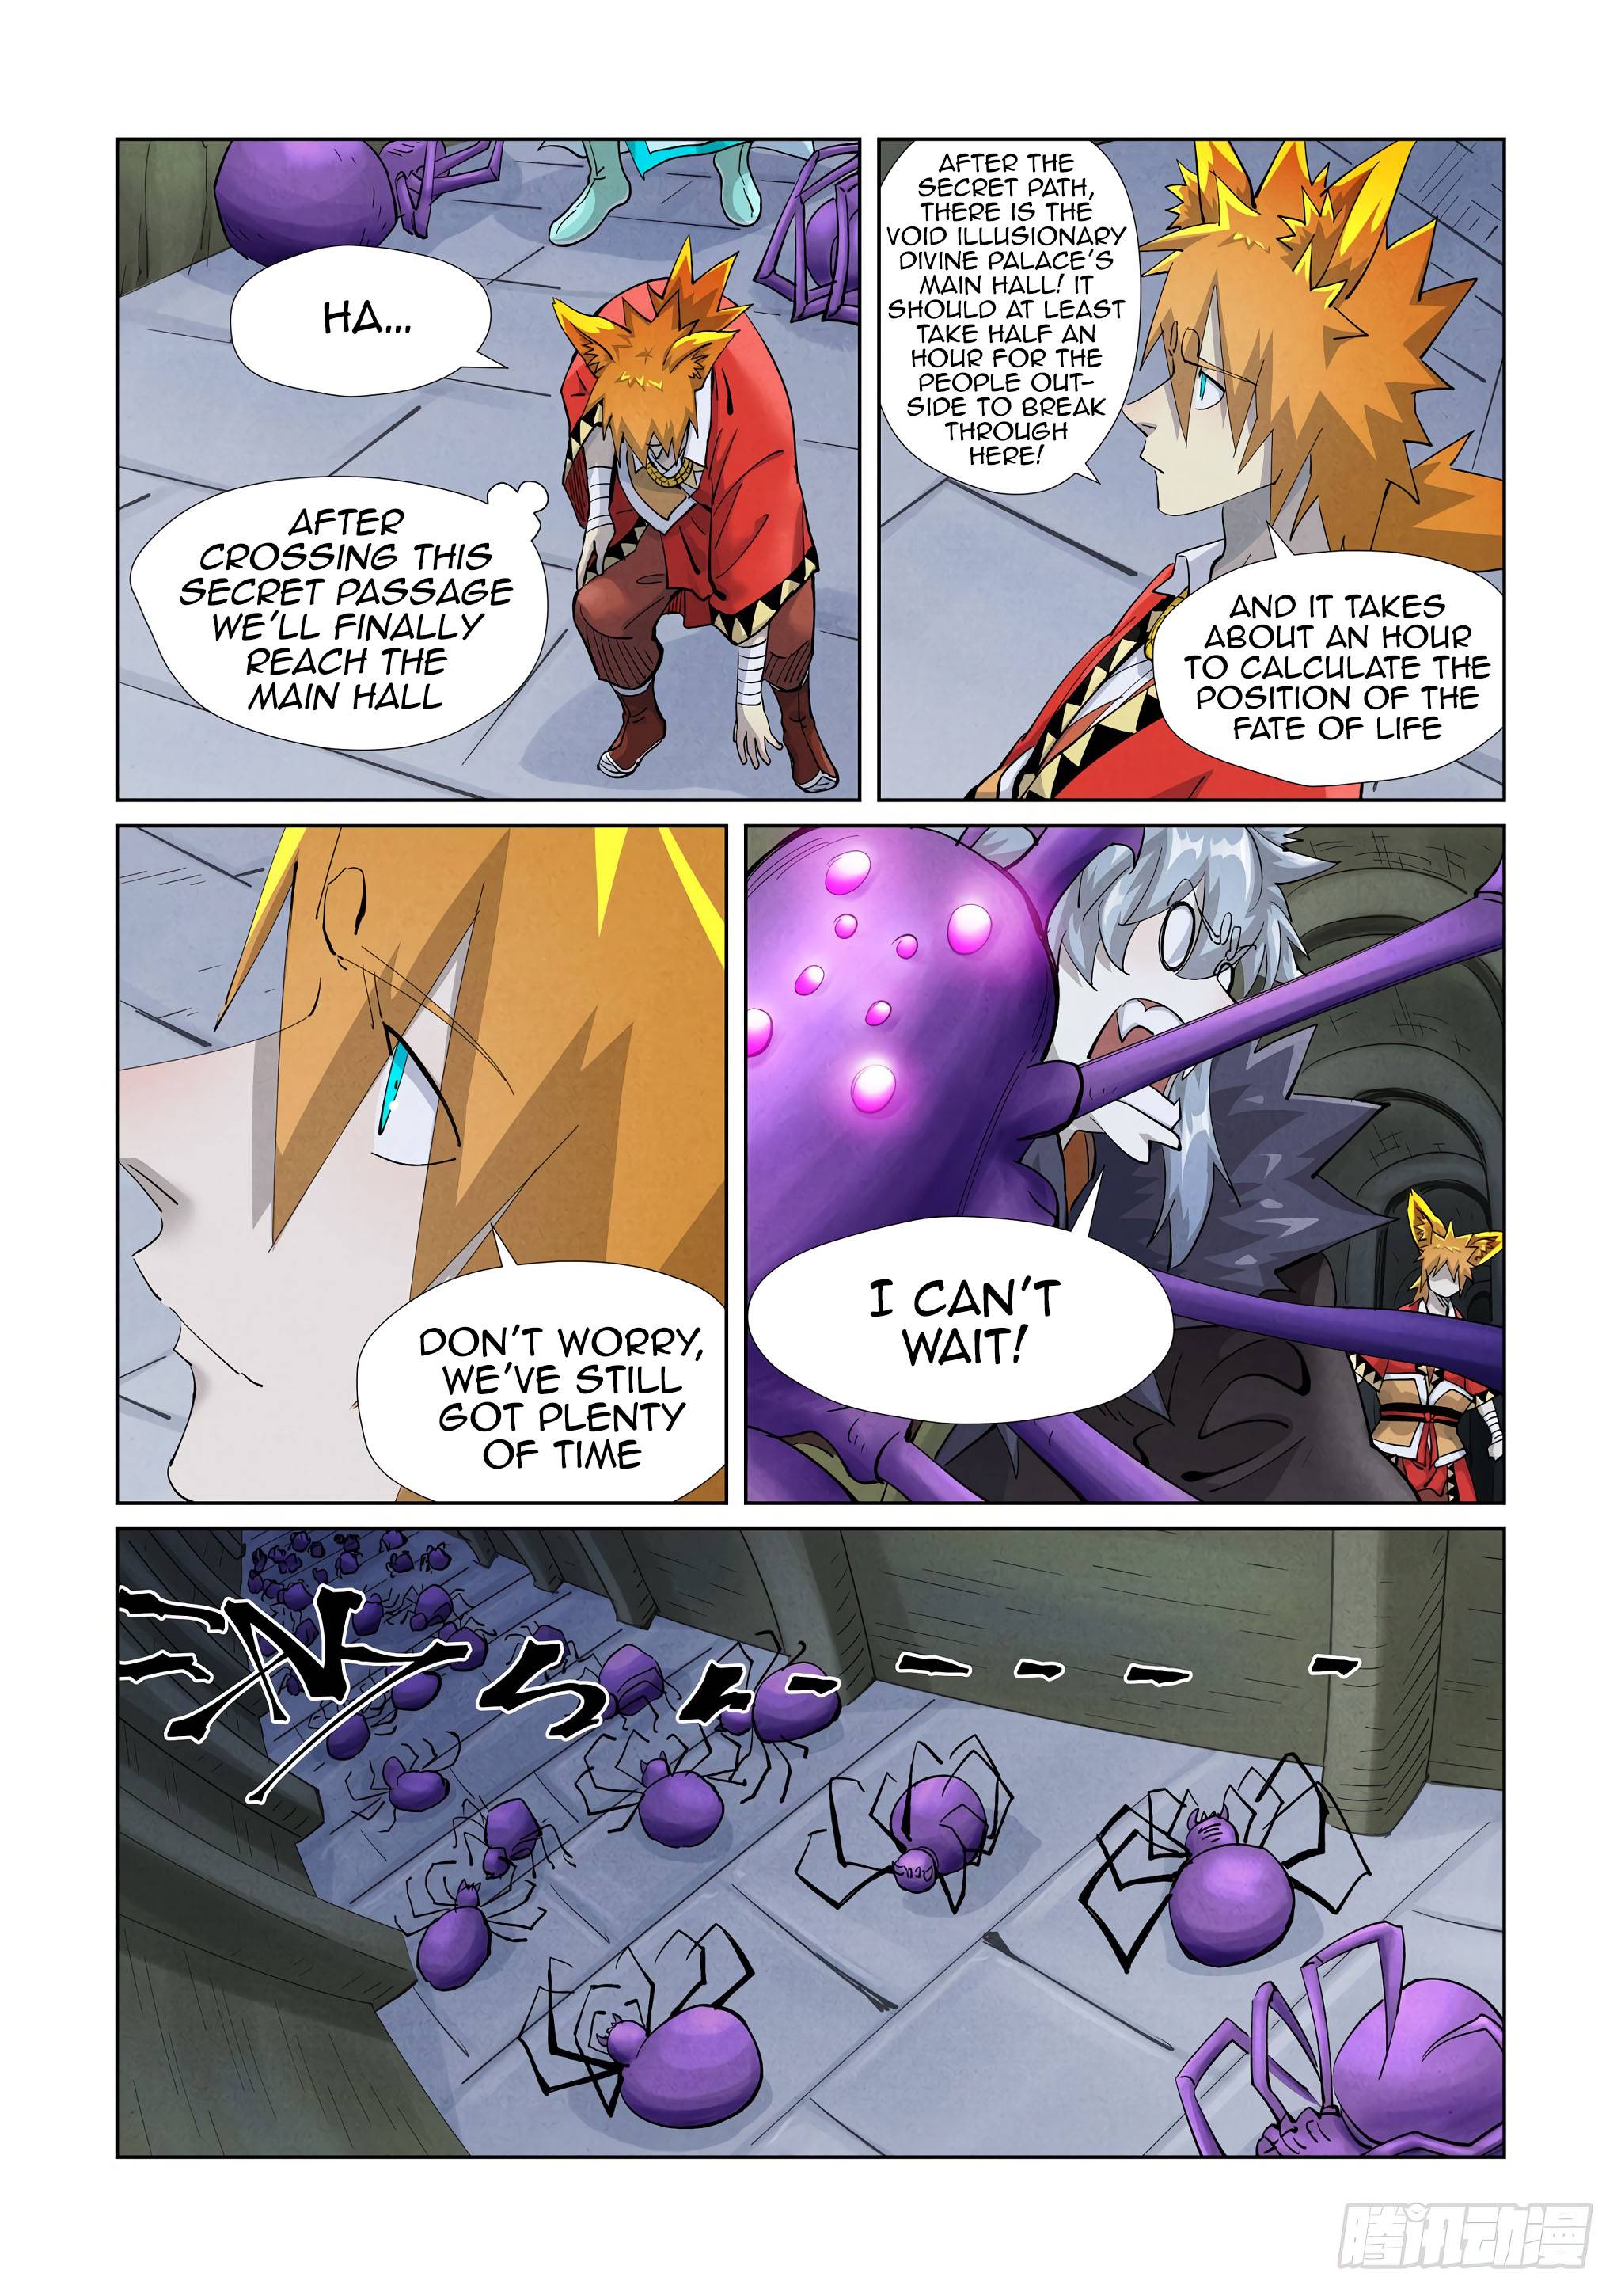 Tales of Demons and Gods chapter 395.1 page 4